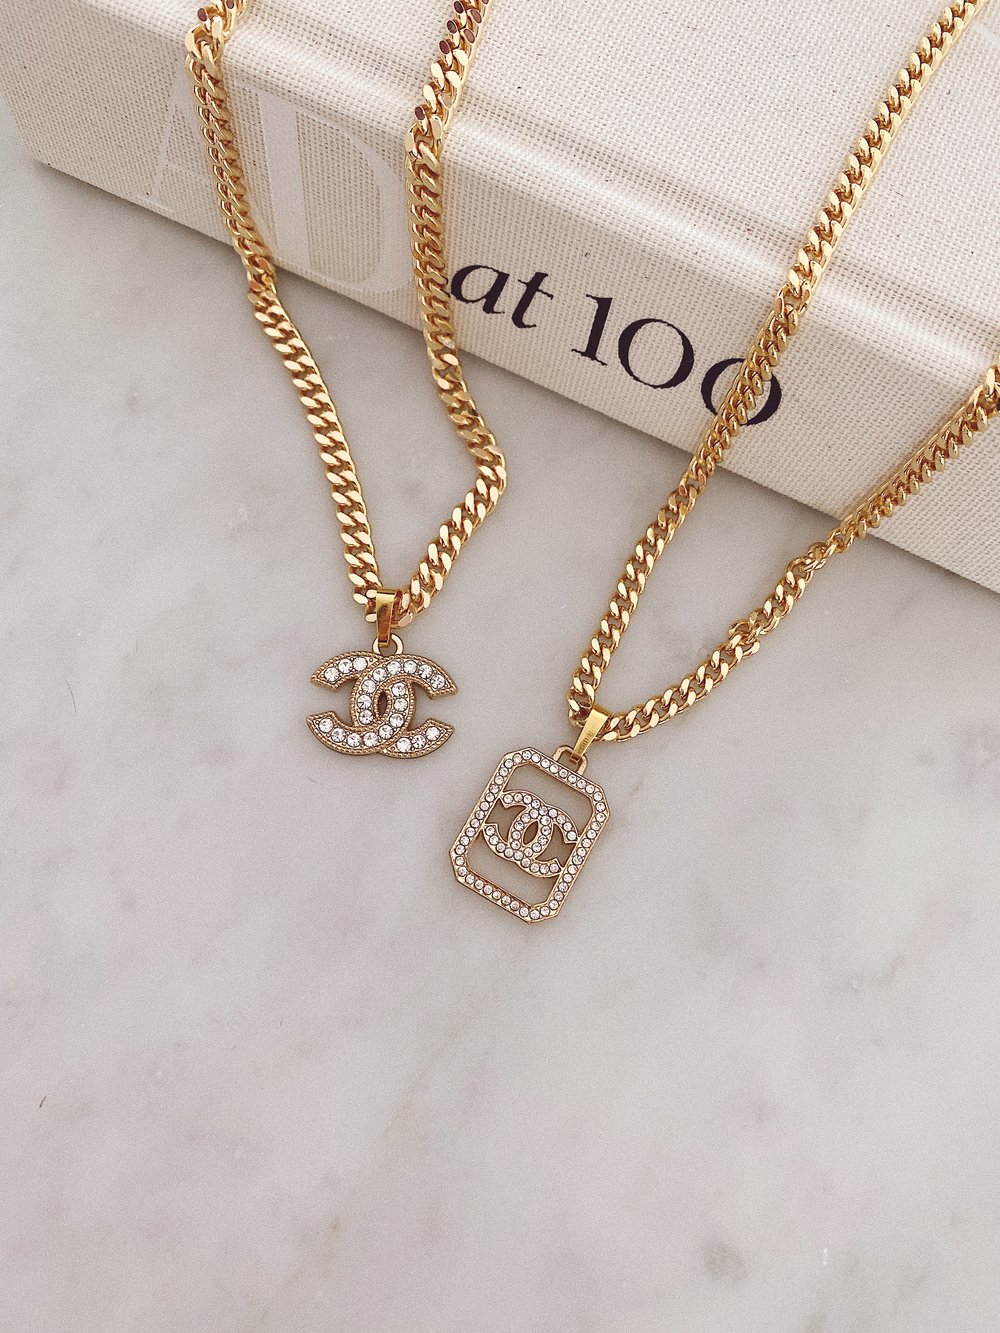 Authentic Chanel Half Crystal, Half Faux-Pearl Pendant | Reworked Gold  17-19 Necklace